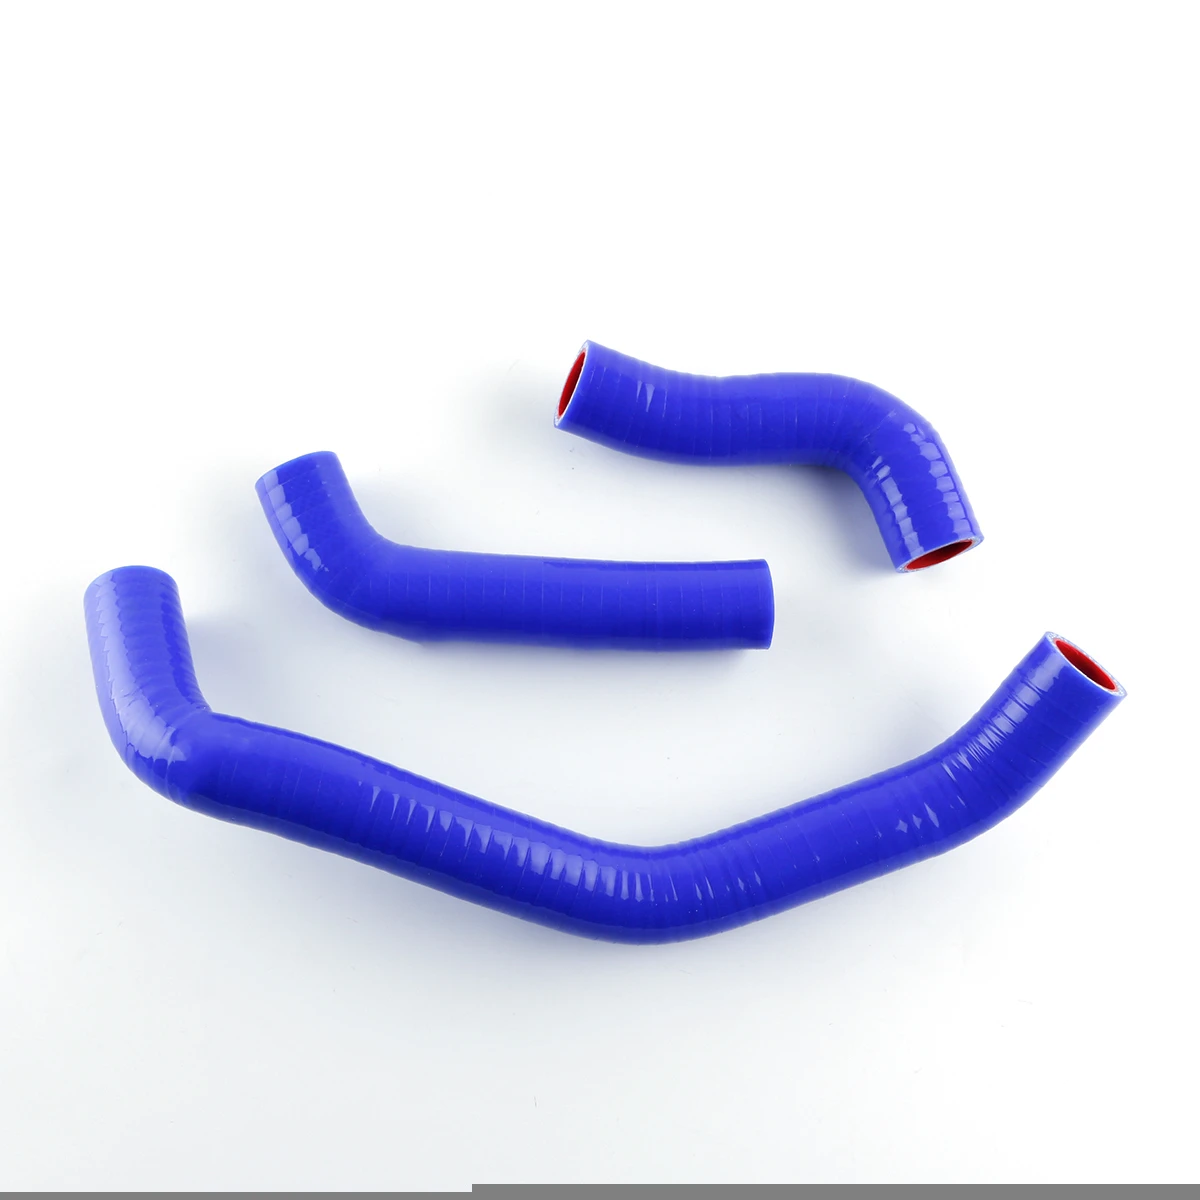 Silicone Radiator Coolant Hose Kit suitable for Kawasaki ZZR1200 ZX 1200 C 2004